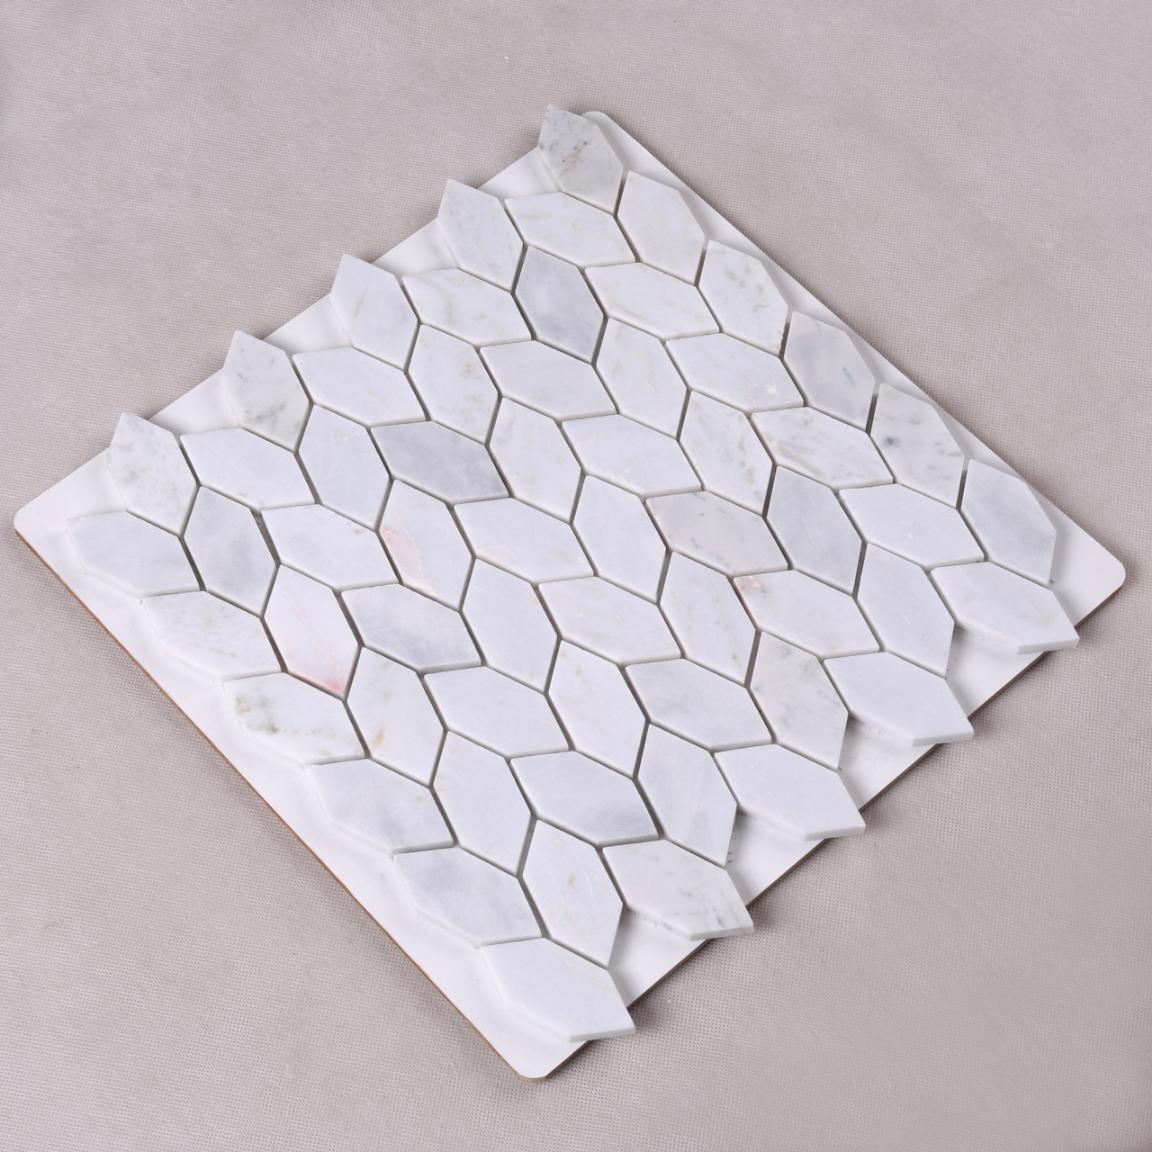 Top glass mosaic tiles for wall white from China for kitchen-3